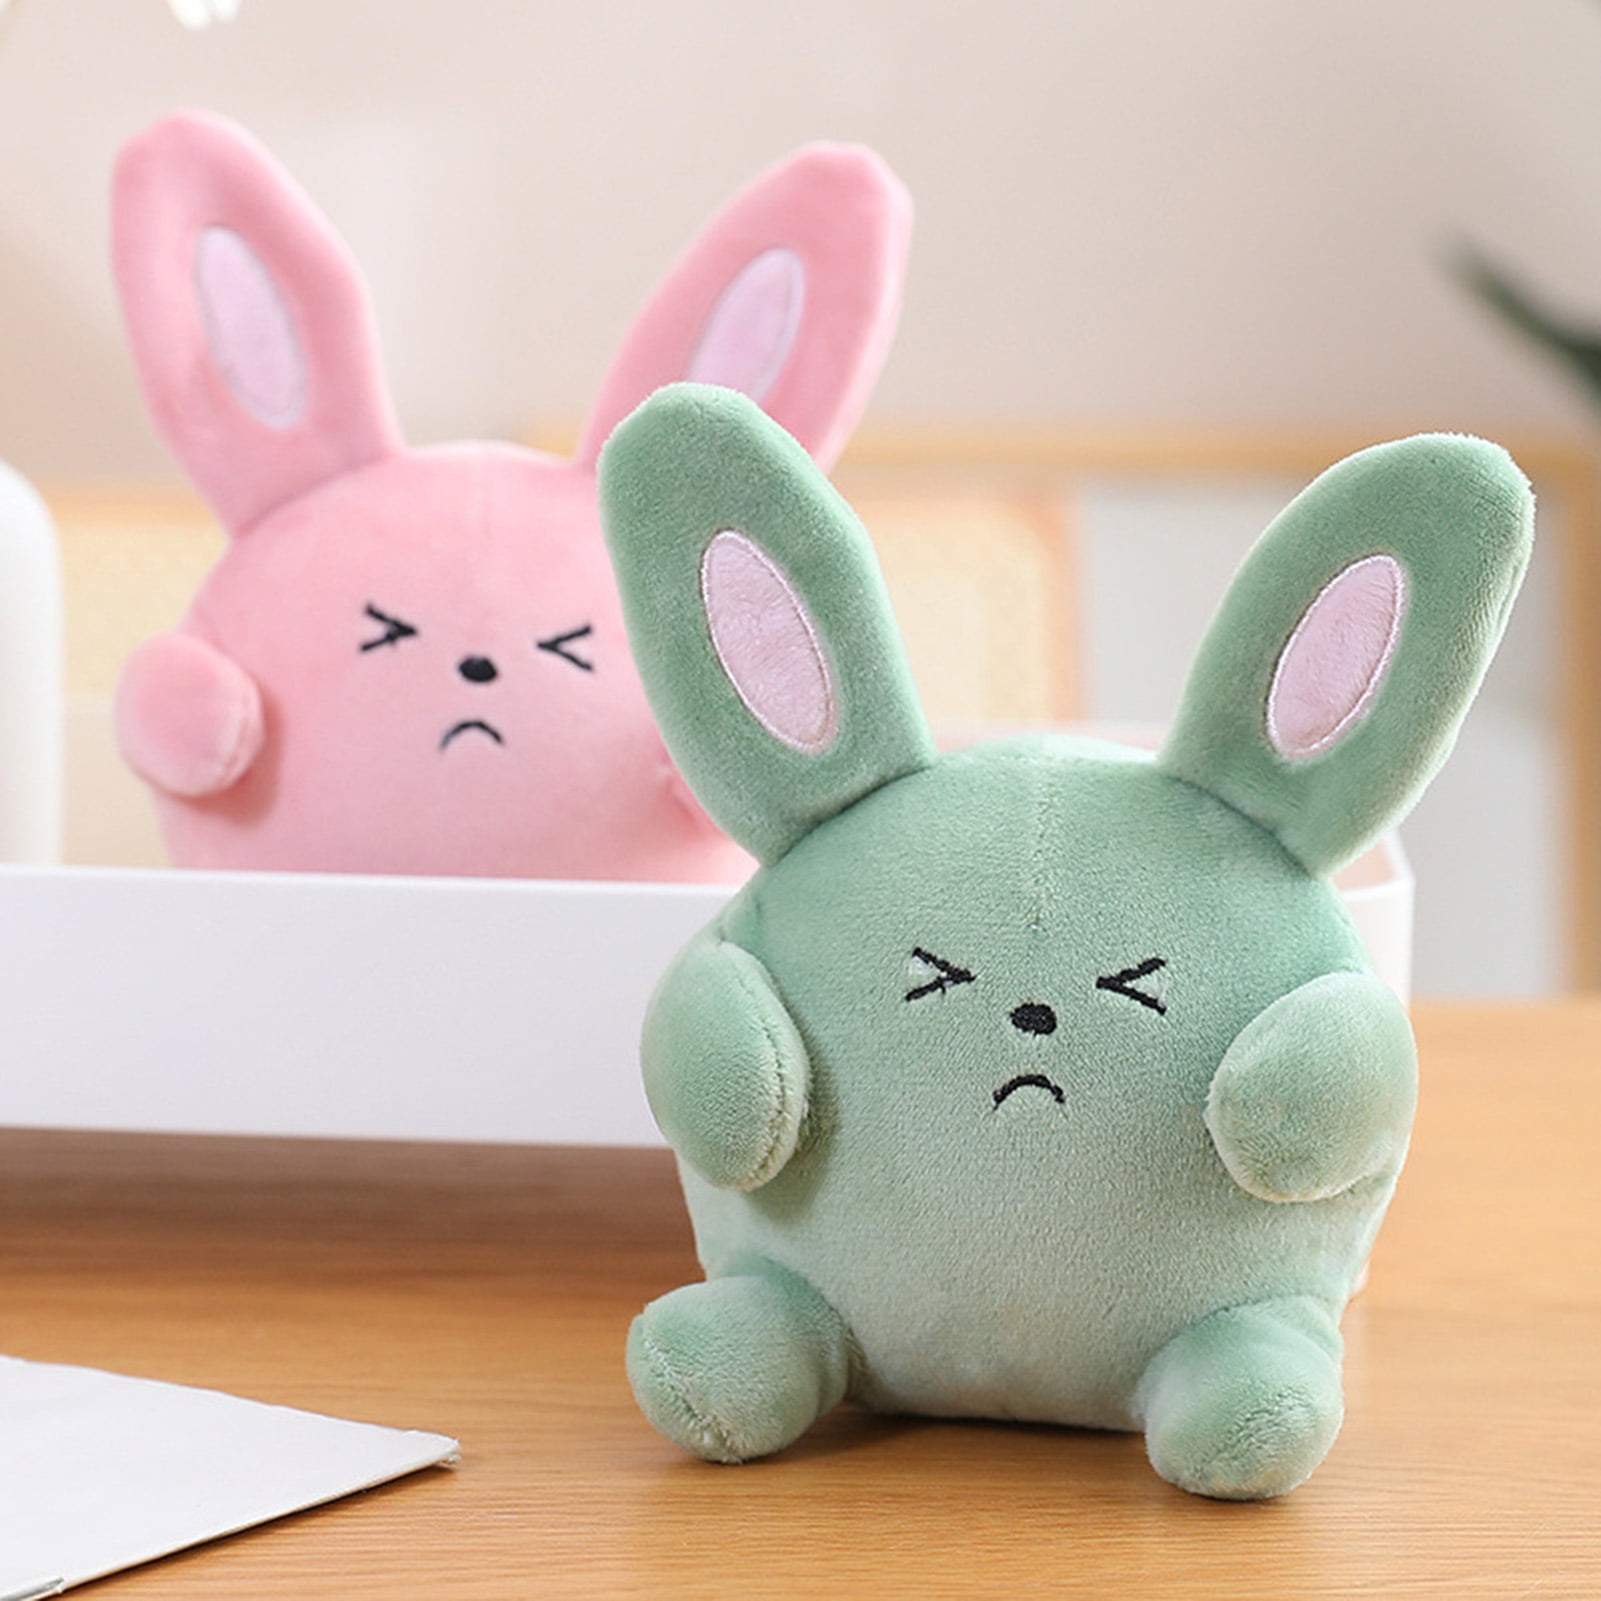 Adorable Kawaii Cartoon Bunny Bunzo Bunny Plush  Soft Stuffed Fat Rabbit  Toy For Sleeping, Weddings, And Decor Available In 70cm And 100cm Sizes  DY50274 From Dorimytrader, $45.89